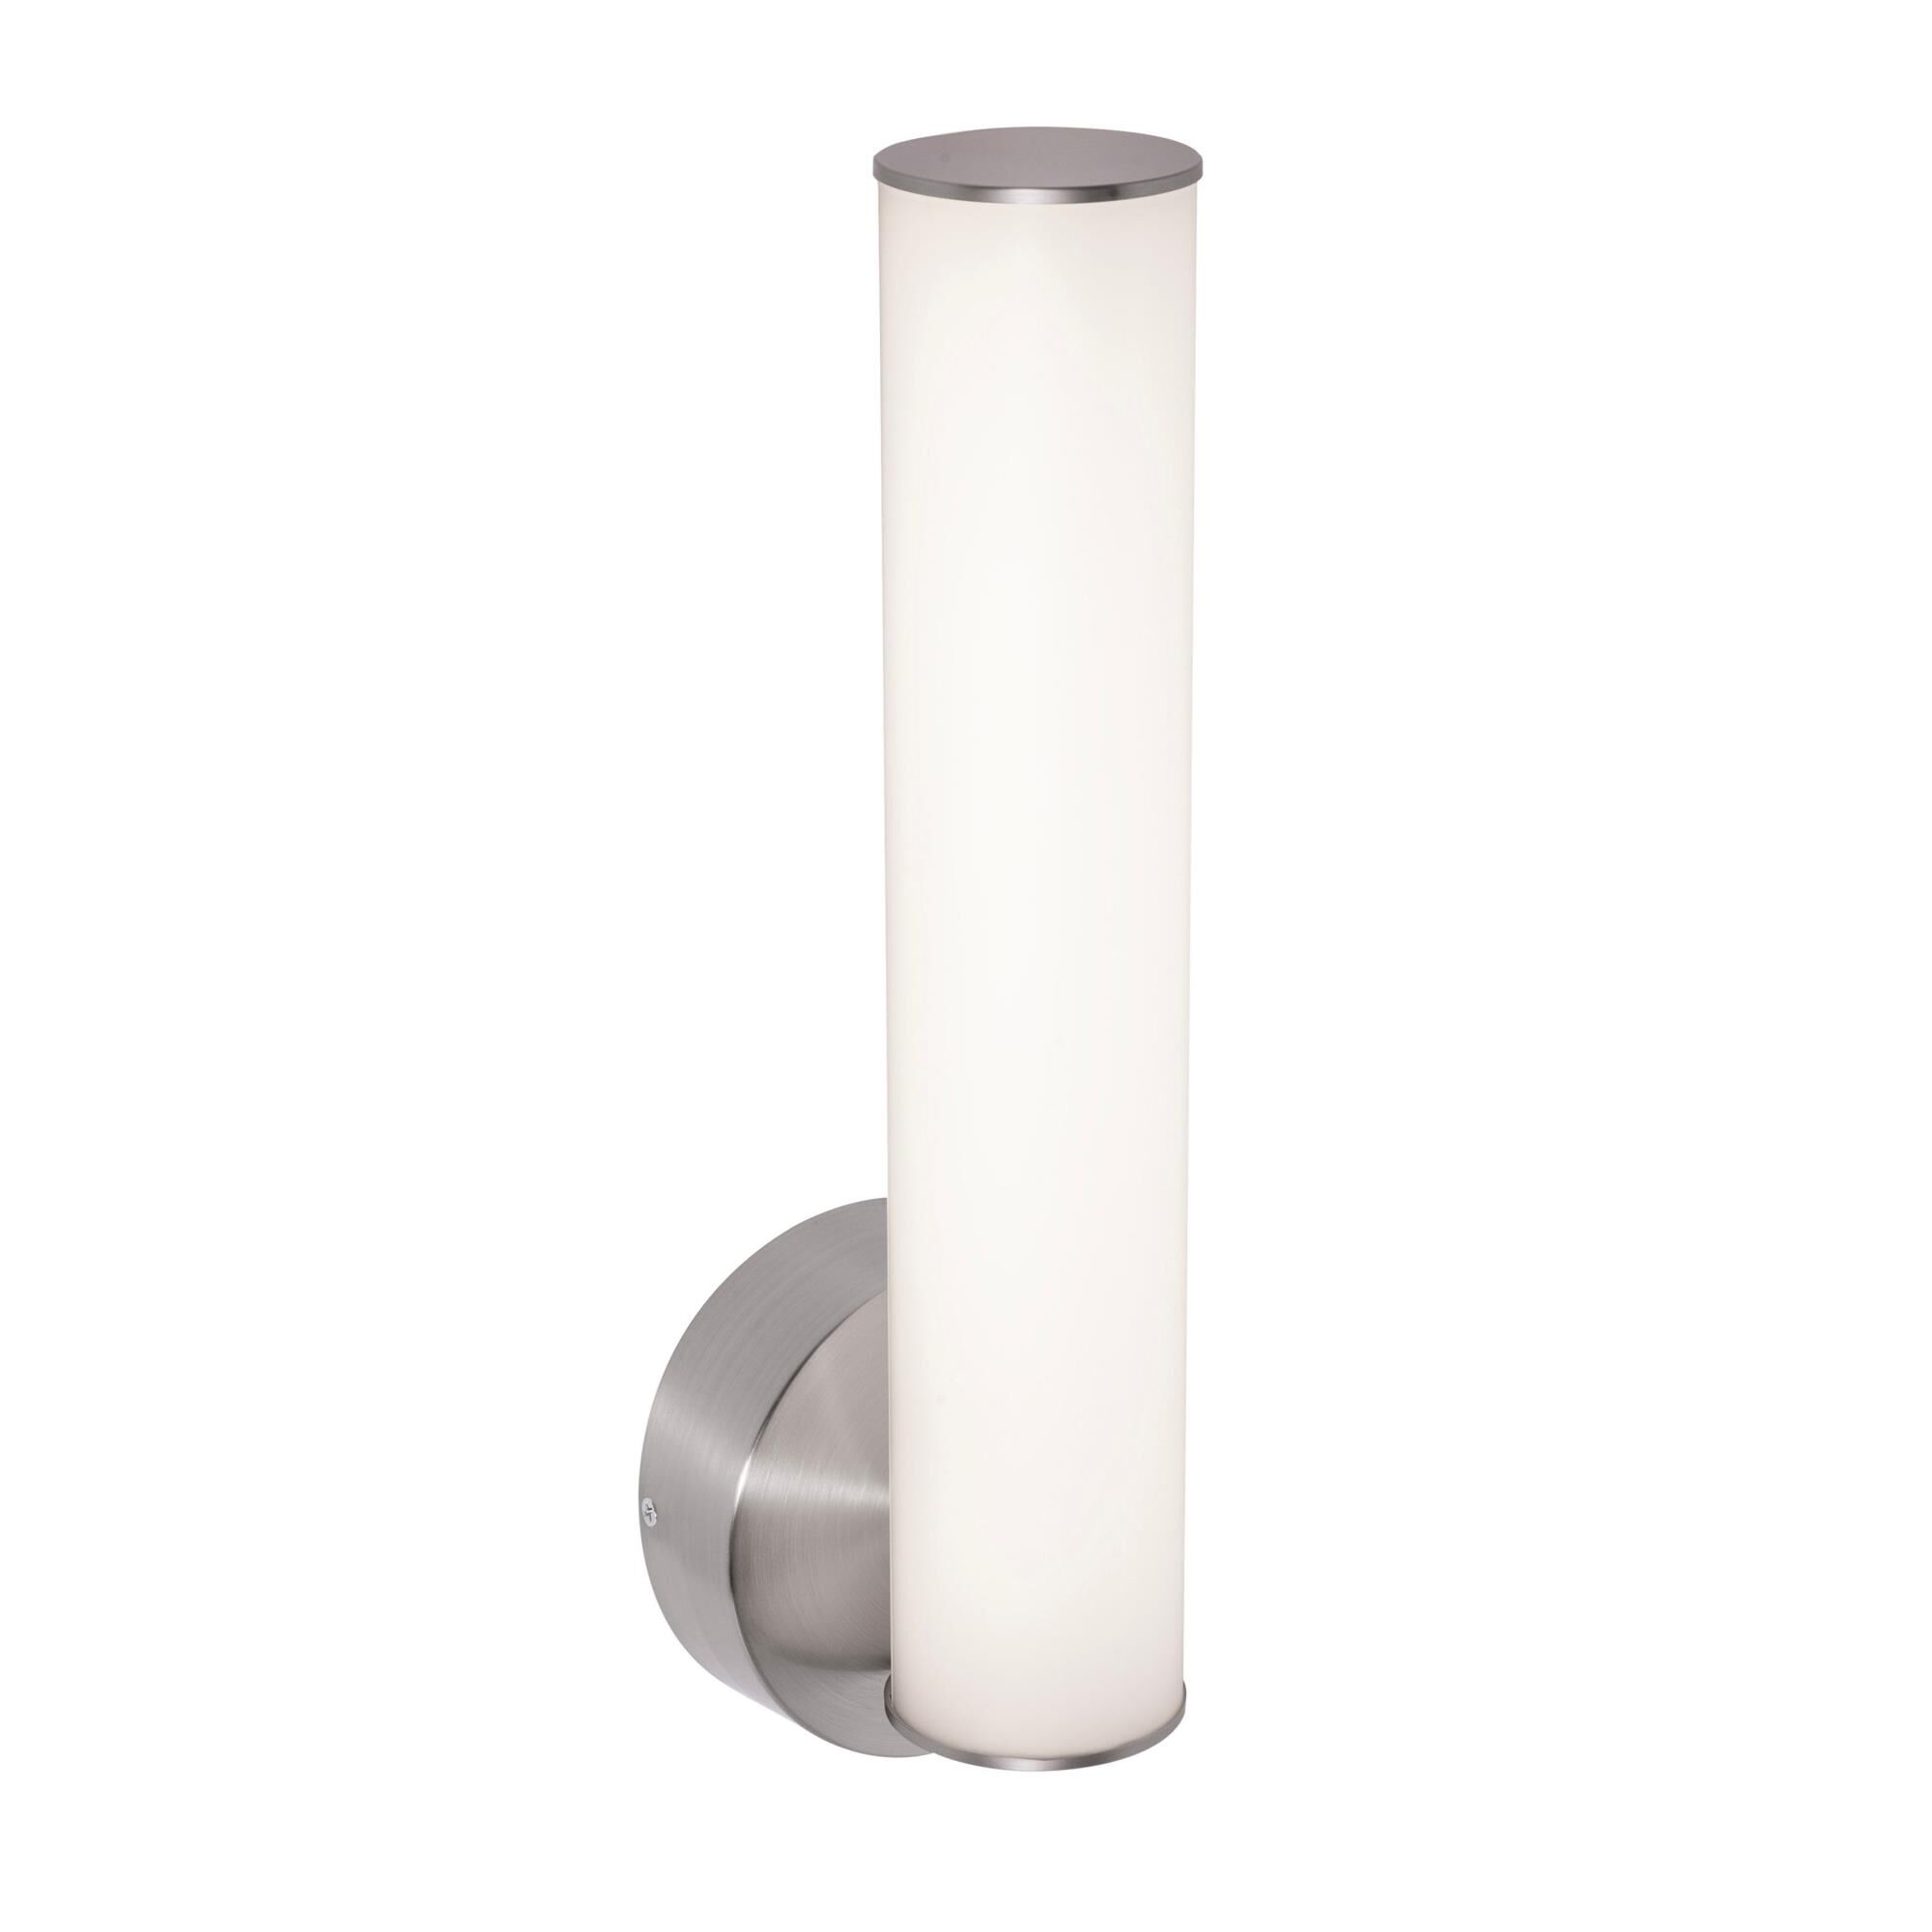 Photos - Chandelier / Lamp AFX Lighting Leia 4 Inch Wall Sconce Leia - LIAS0514LAJMVSN - Modern Conte 